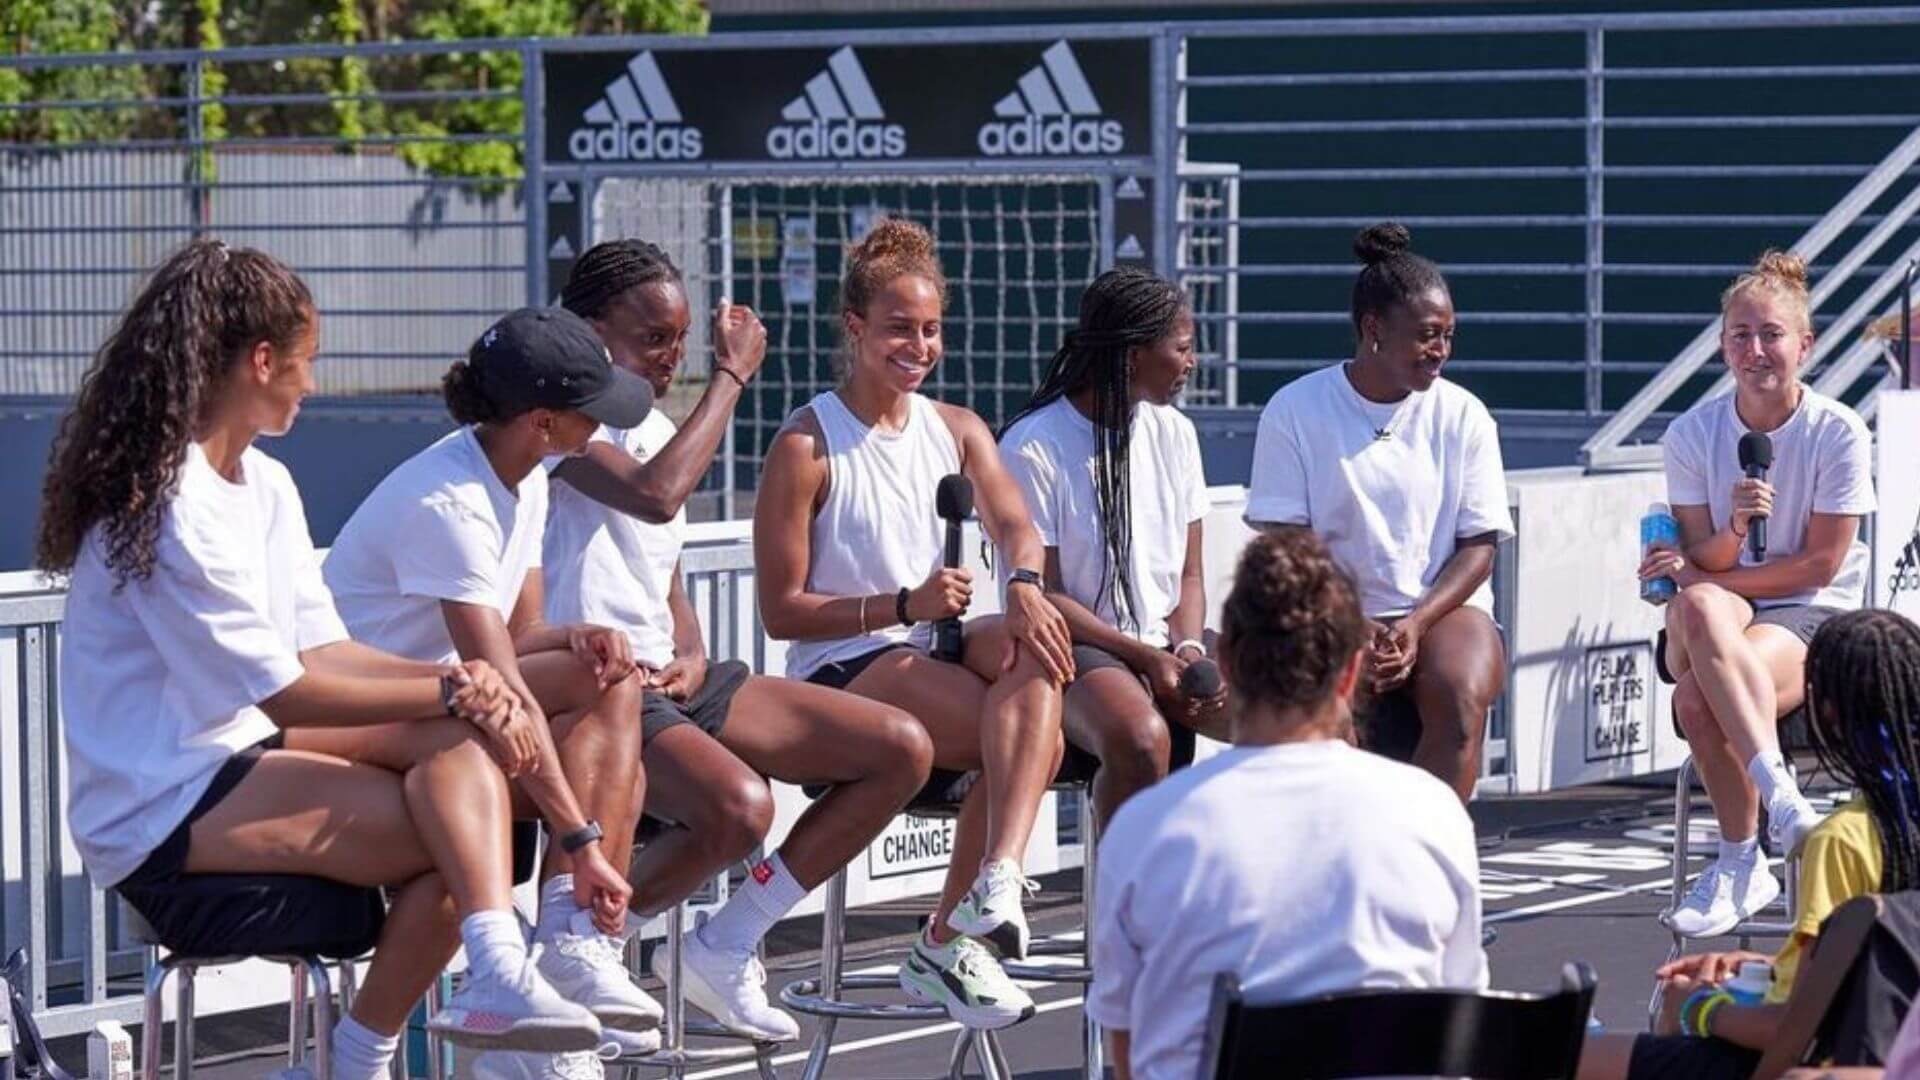 The Black Women's Players Collective at an event talking about mental health